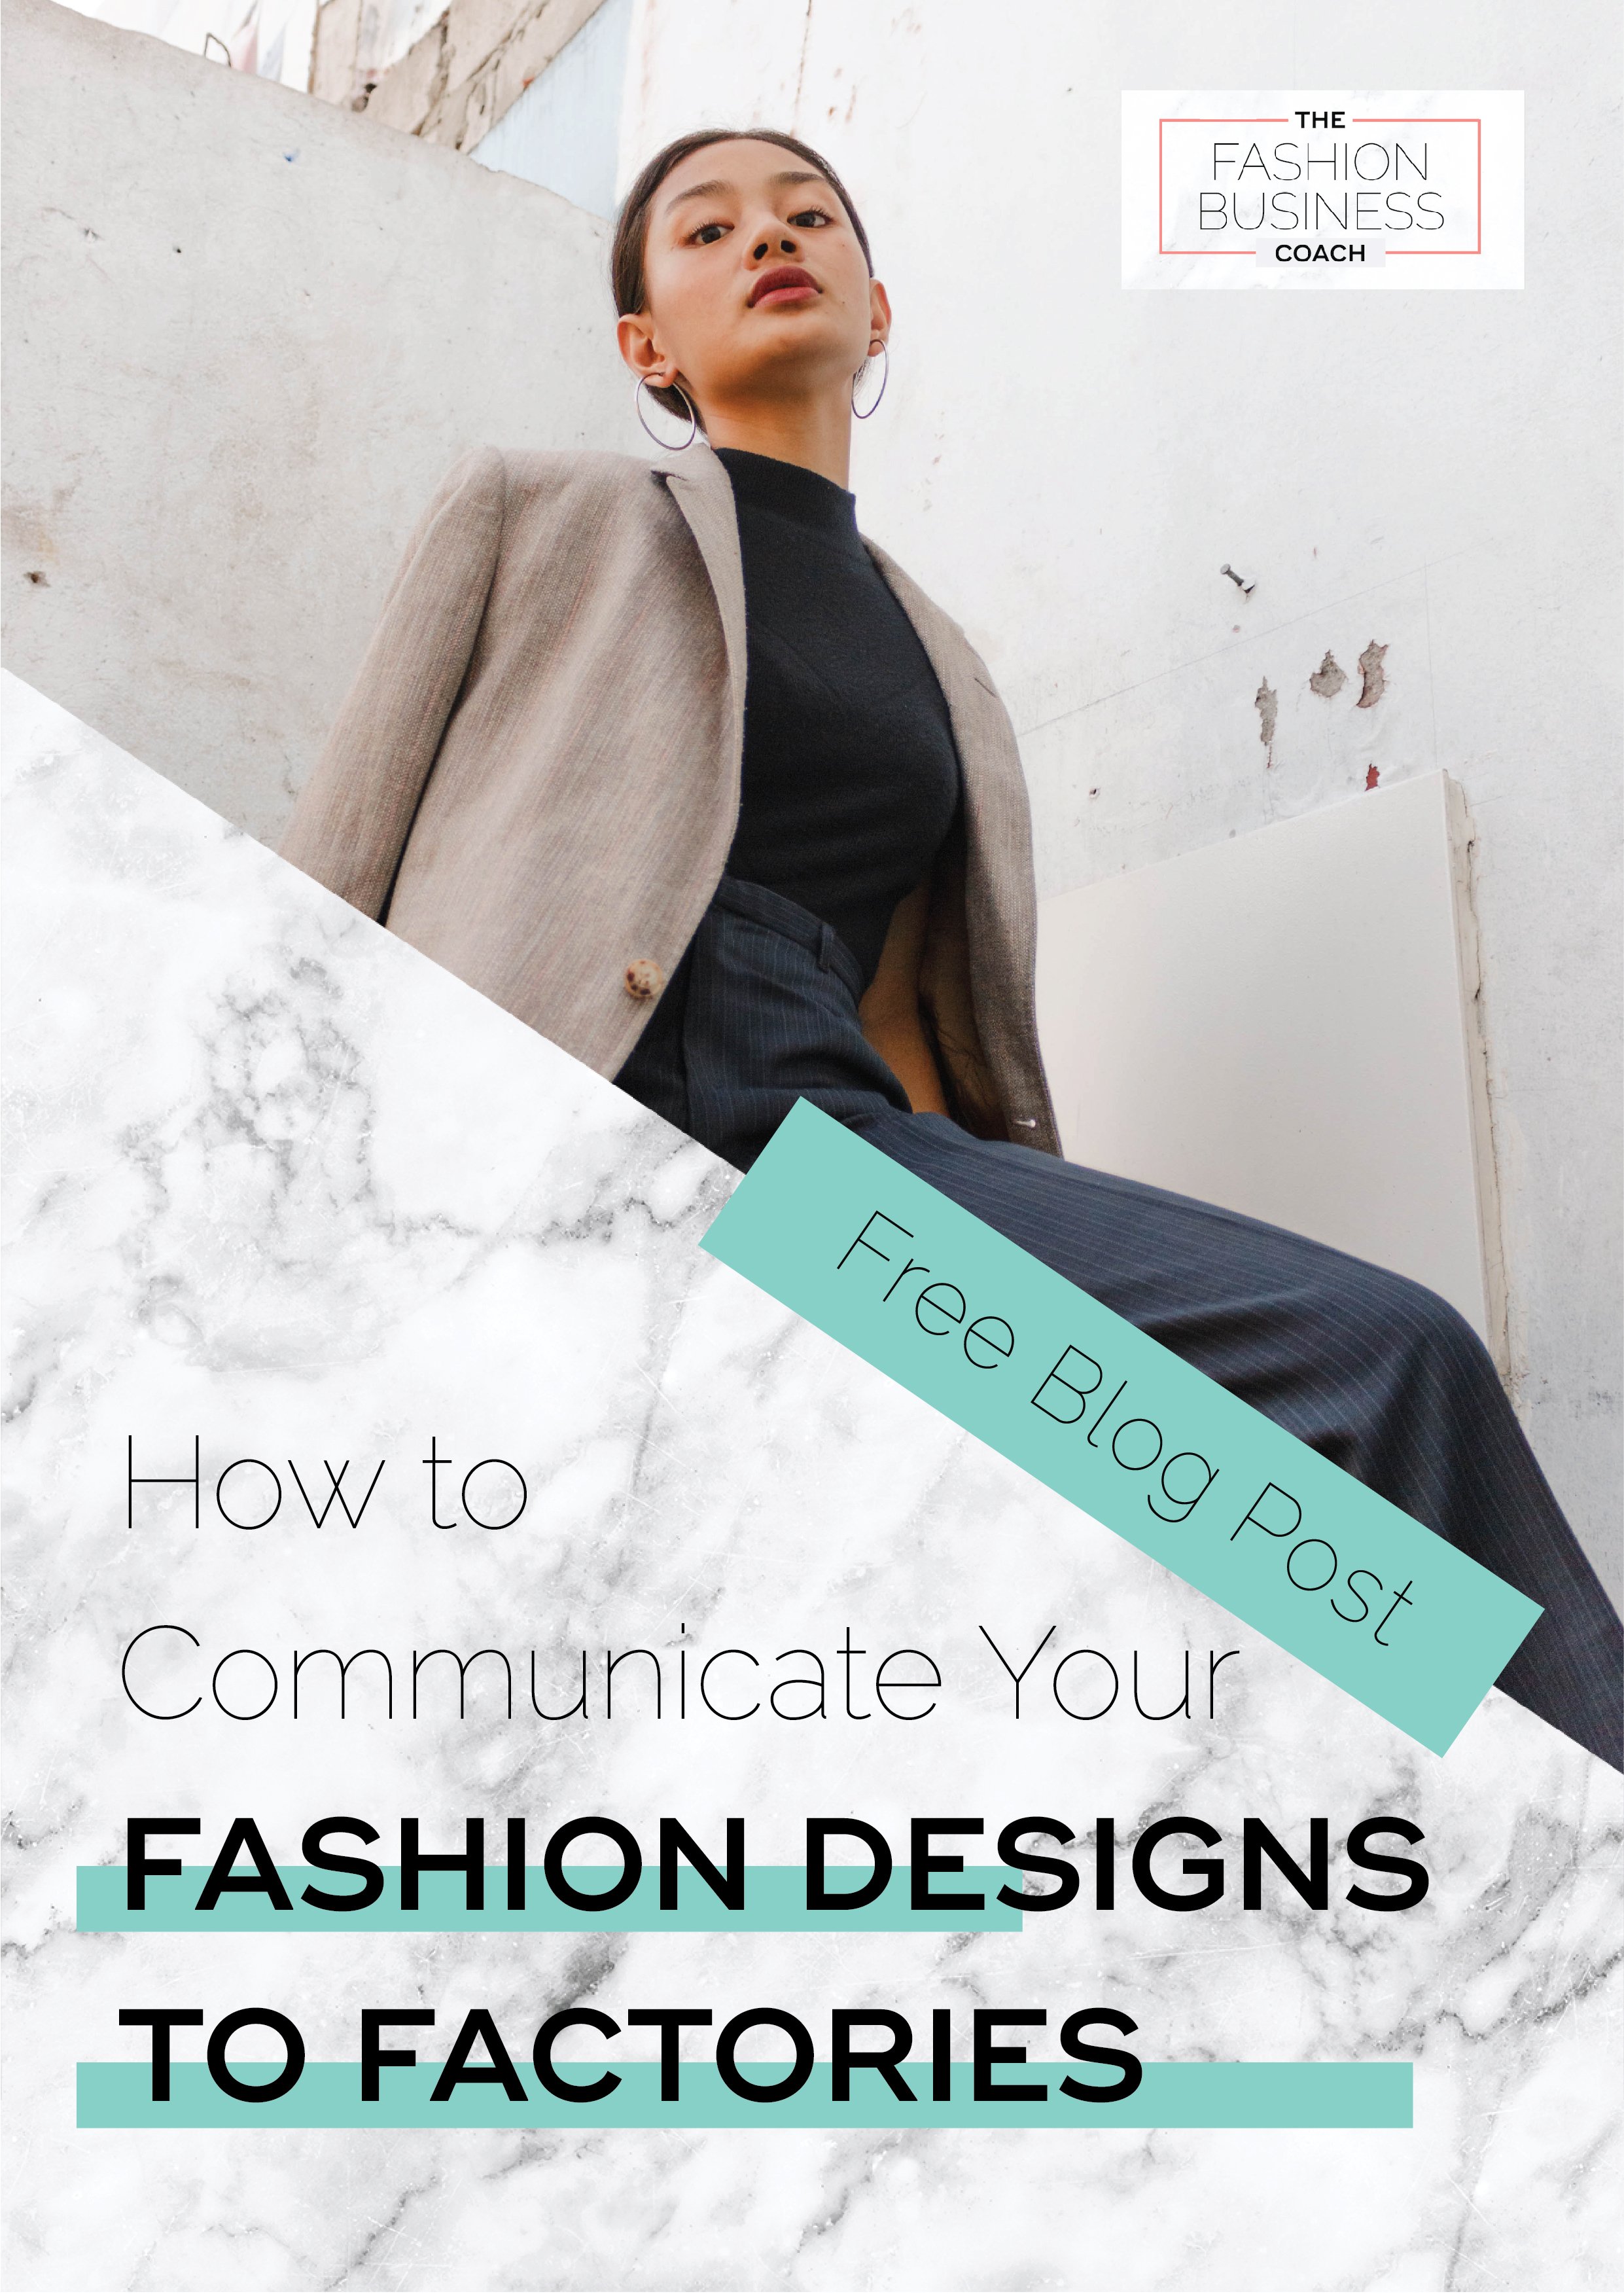 How to Communicate Your Fashion Designs to Factories.jpg